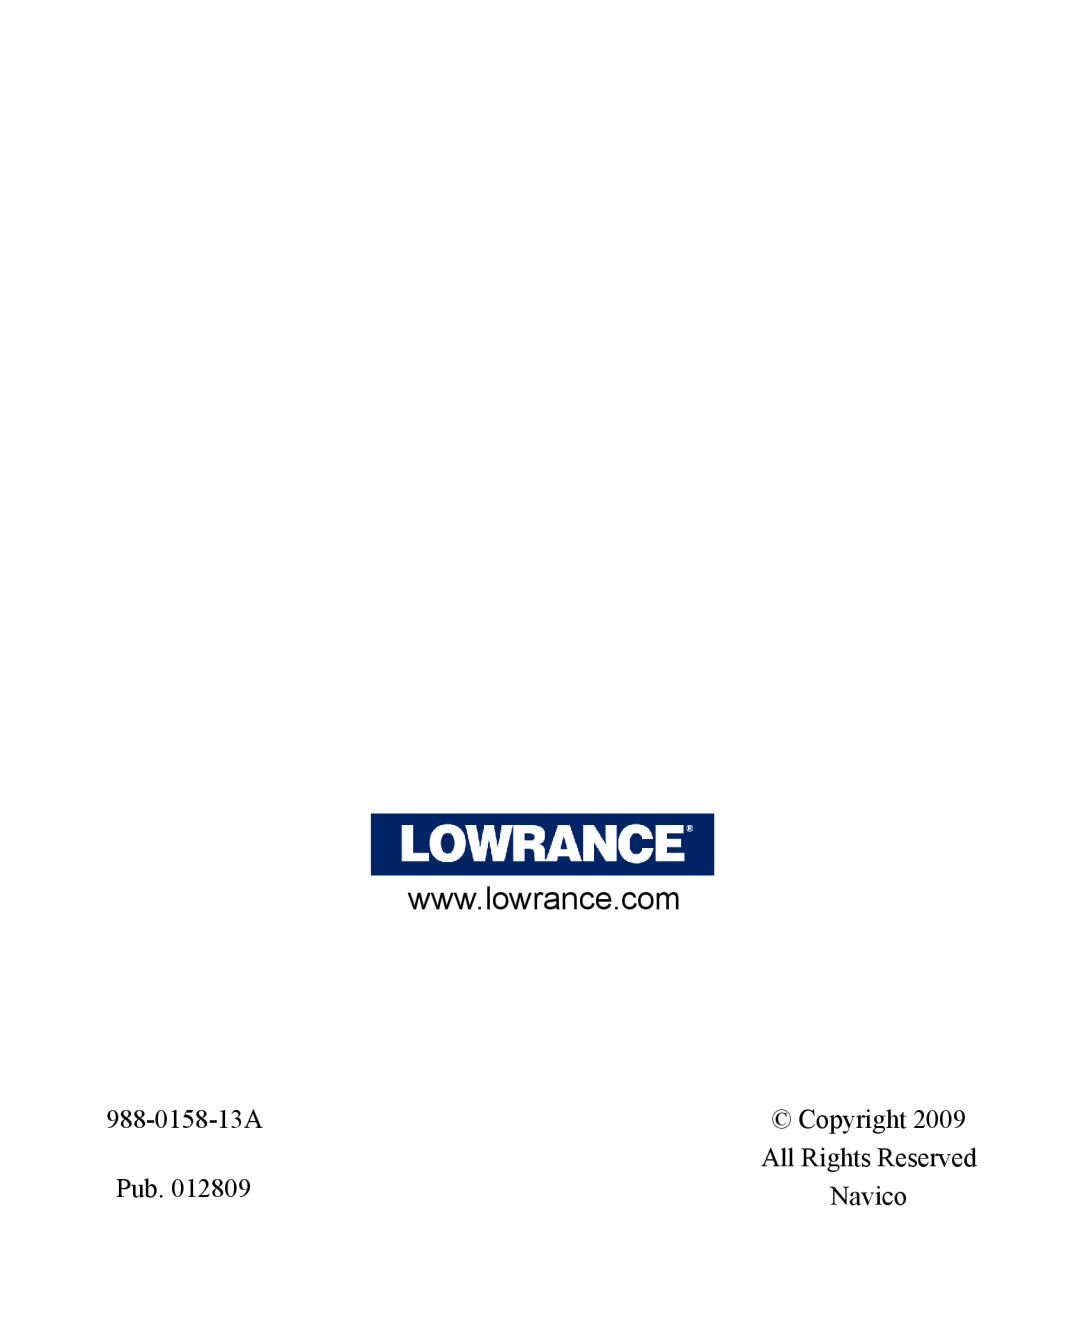 Lowrance electronic LWX-1 installation instructions 988-0158-13A, Copyright, Pub, All Rights Reserved, Navico 